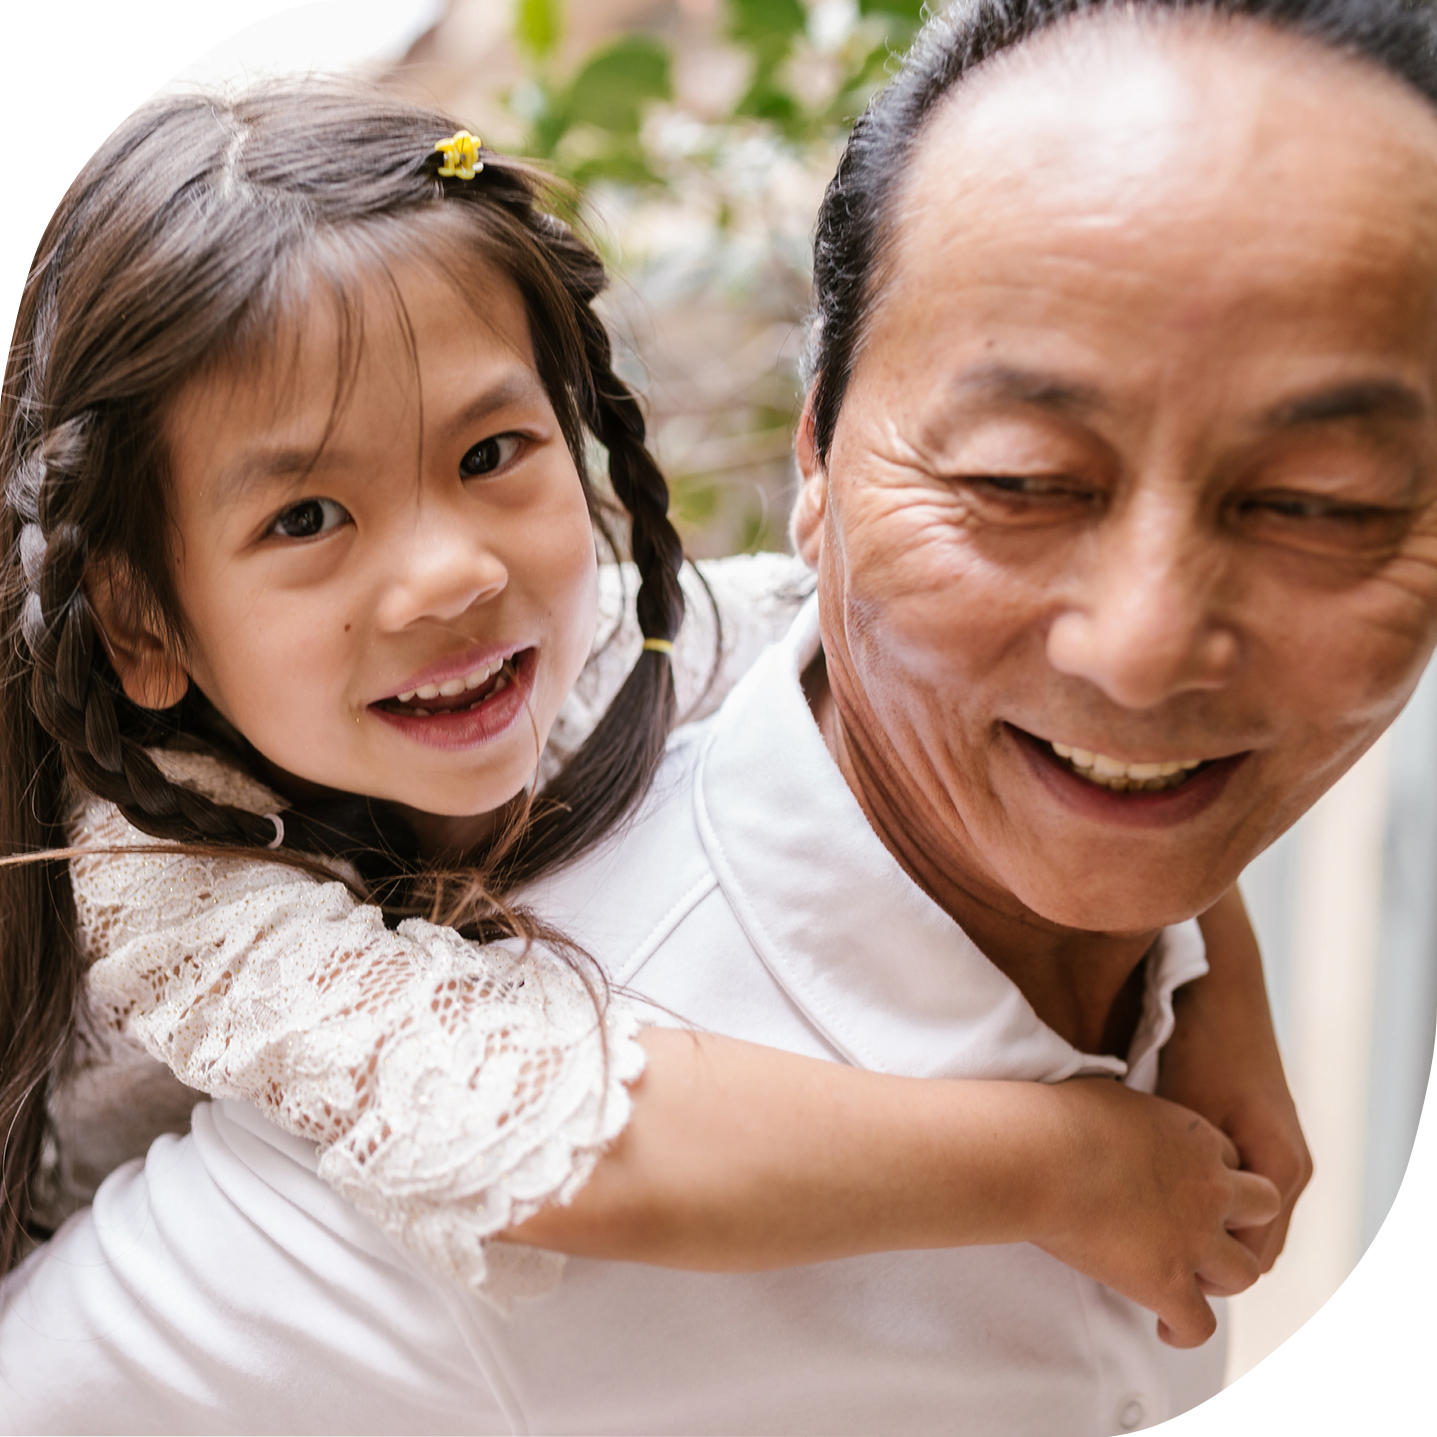 A smiling Asian father or grandfather is holding his young daughter on his back and looking lovingly in her direction. Her face is directed towards the camera and she is smiling. Her arms are wrapped around her relative's neck.